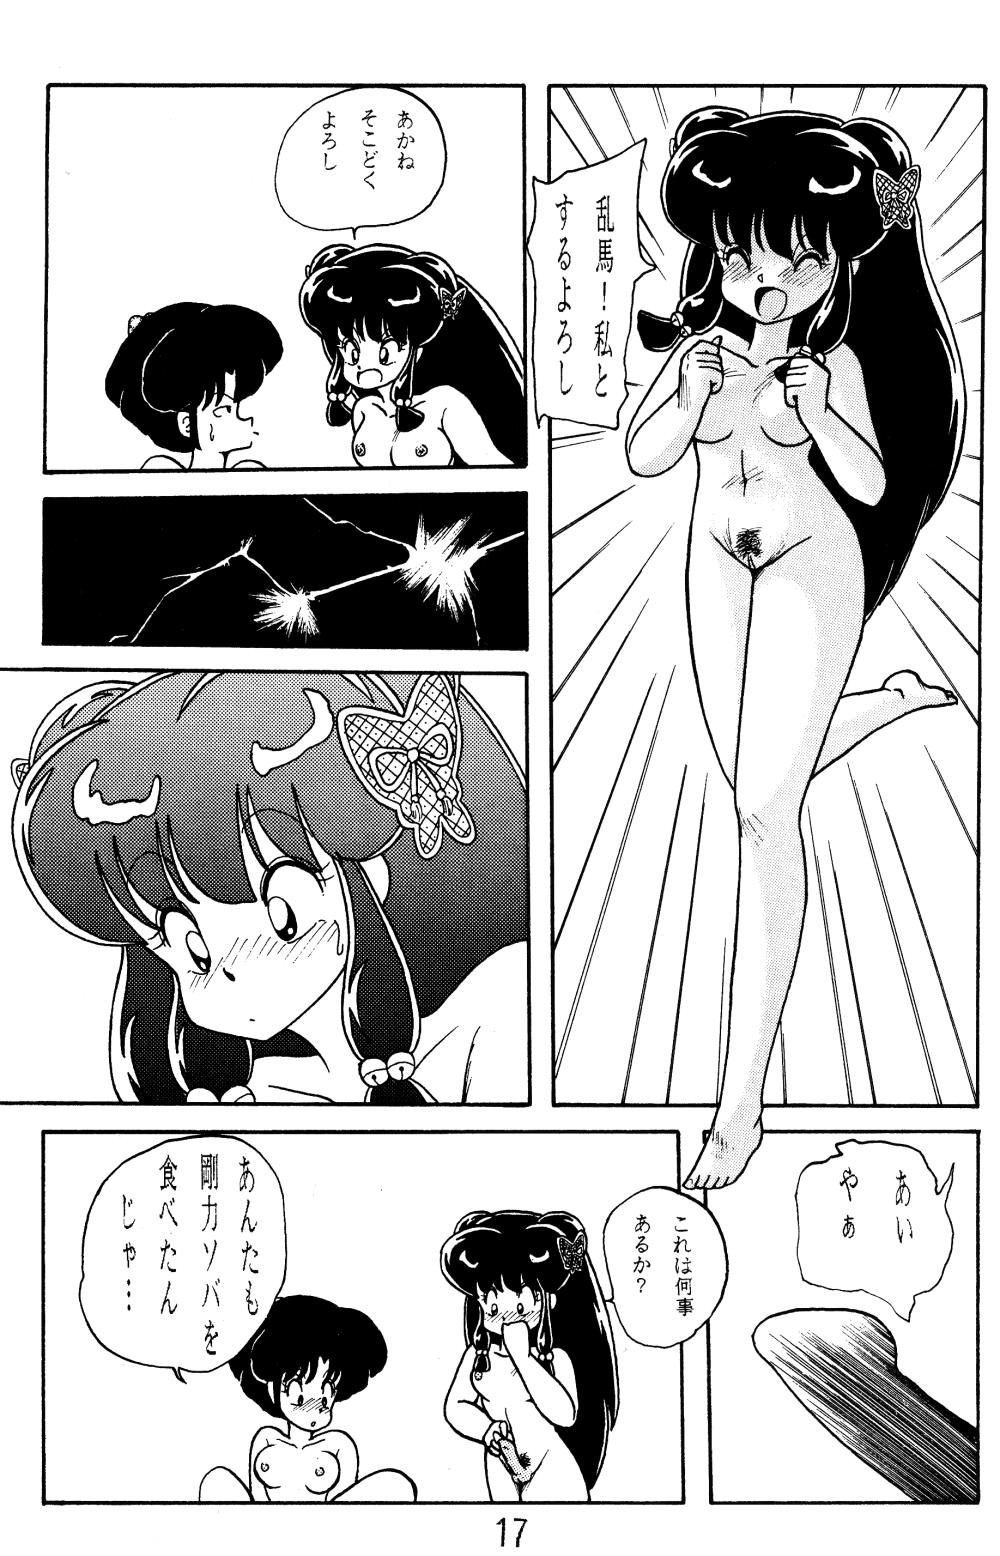 NOTORIOUS Ranma 1/2 Special 15